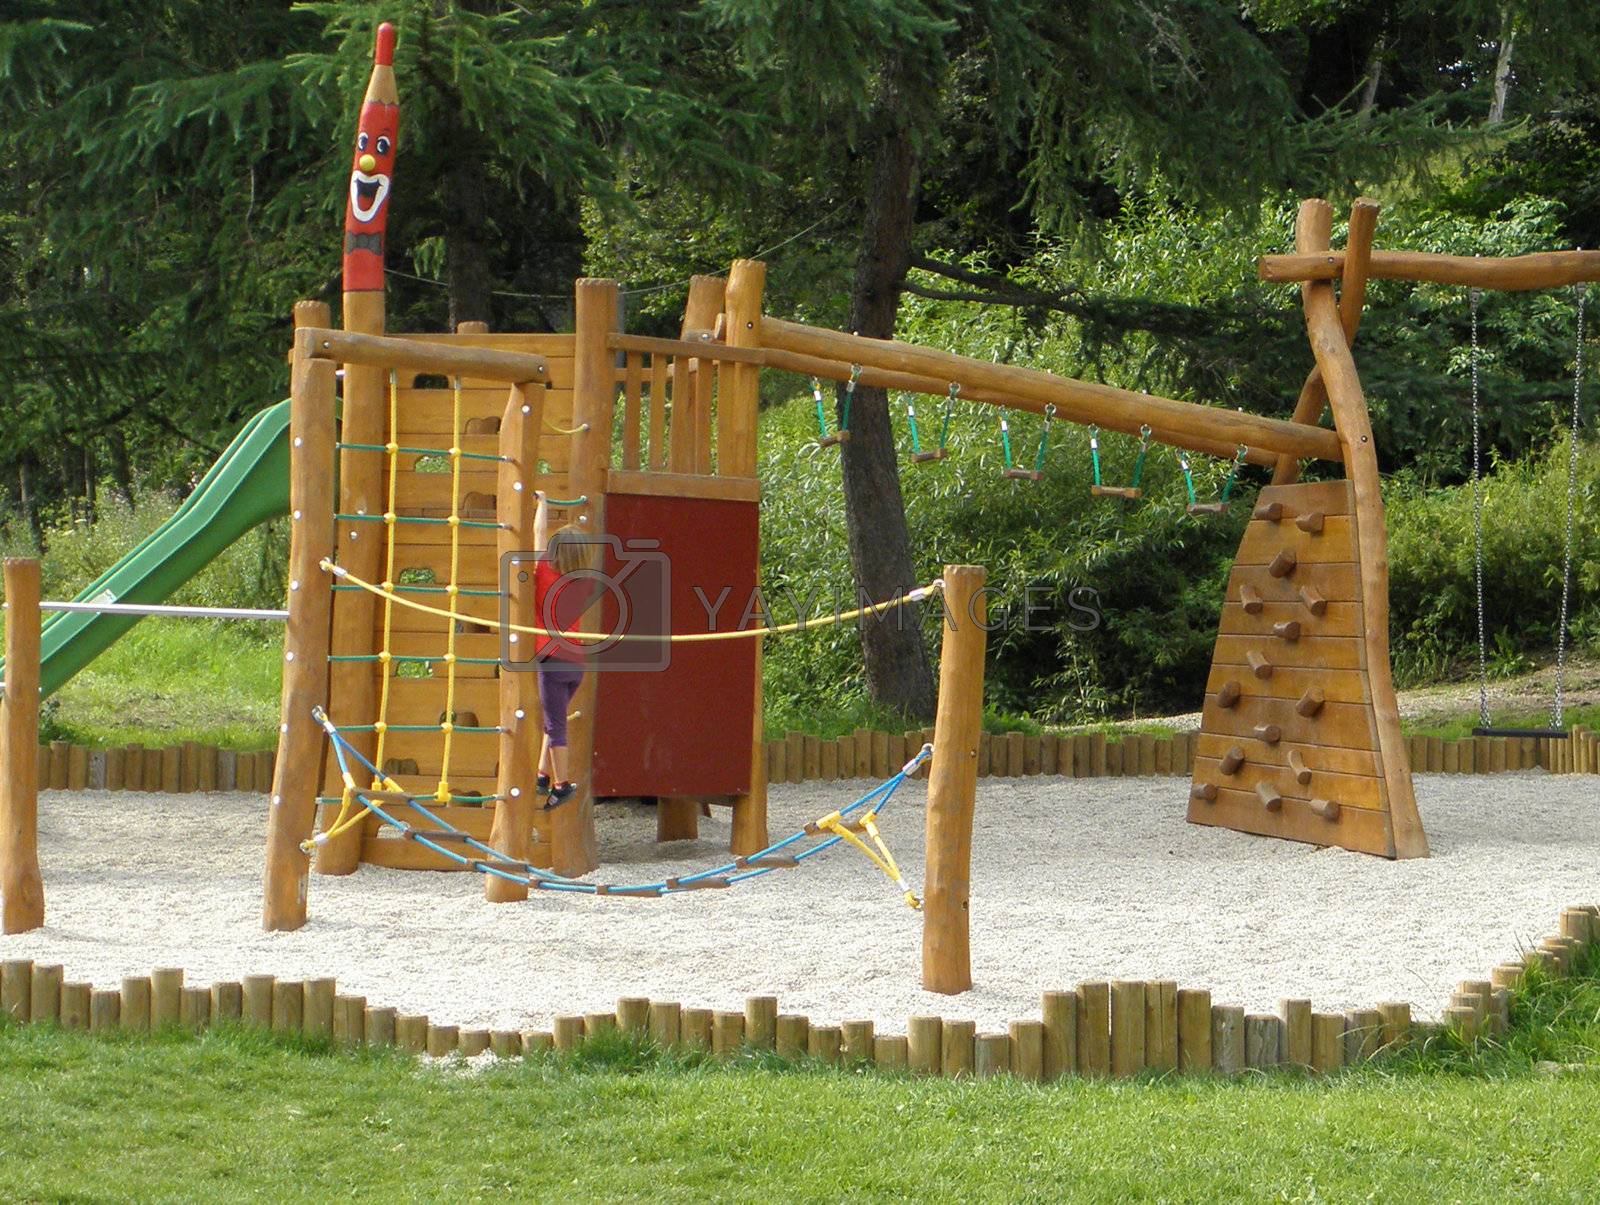 Royalty free image of playground by Olymp78